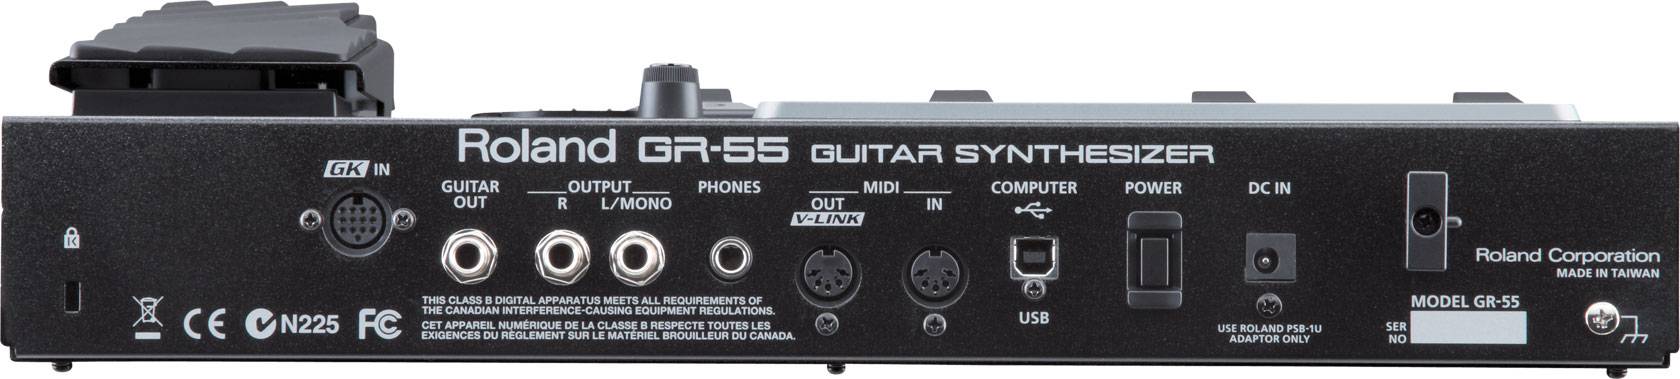 Roland GR-55S Black Guitar Synthesizer